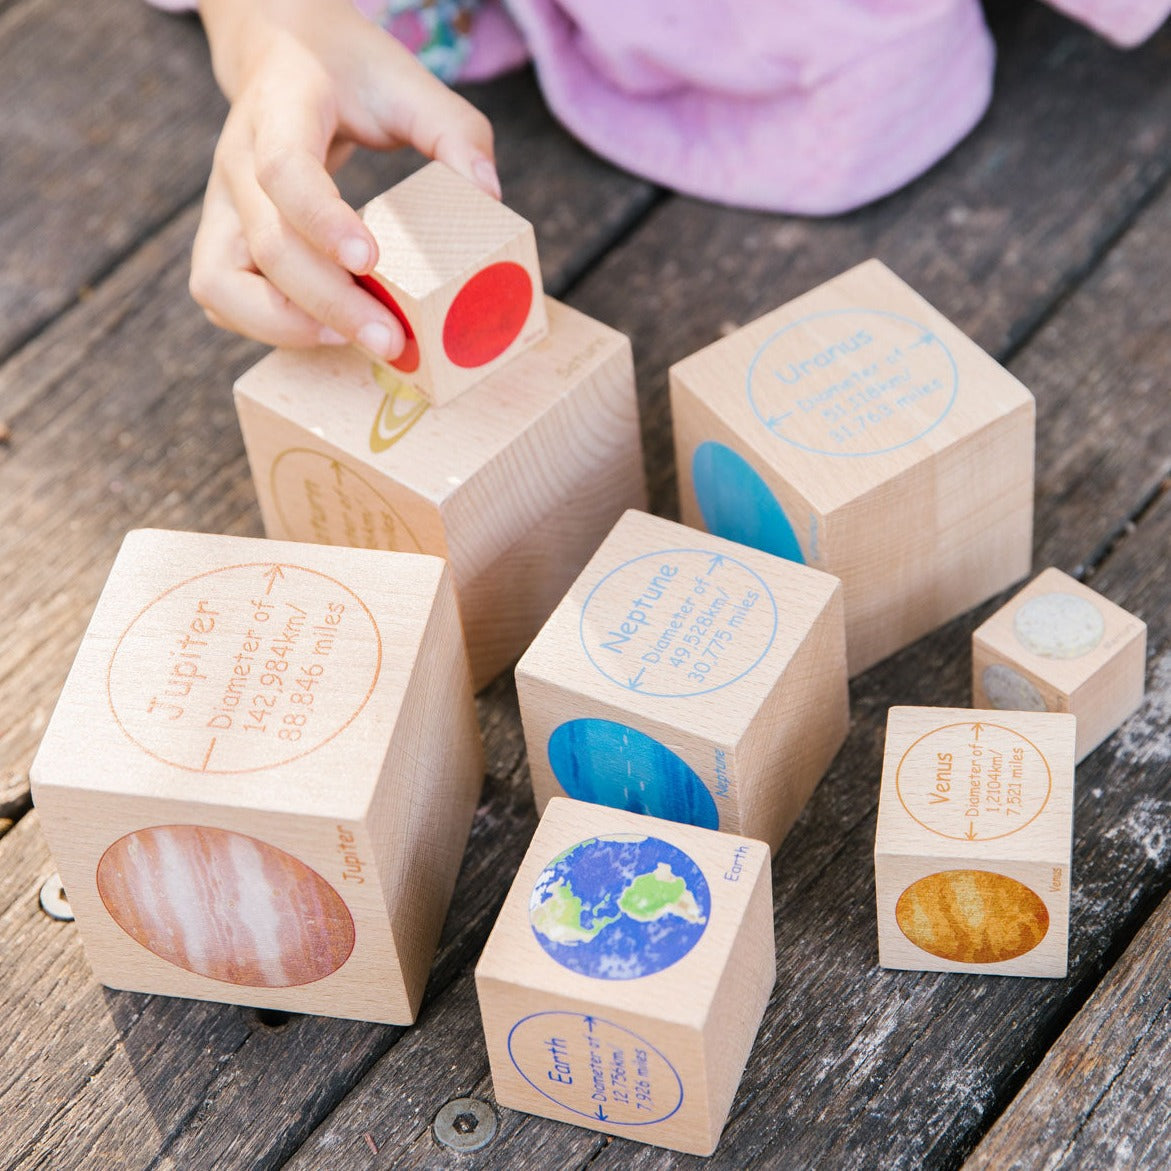 Playing with Planets, Take learning to a new level with this set of beautifully illustrated blocks that will take your little one on a journey through outer space. With eight blocks, one for each planet in our solar system, children can explore the size and distance of each planet from the Earth. The diameter of each planet is displayed on the blocks, aiding in the understanding of size ratios and distance in space. Stacking the blocks is not only fun, but also helps develop their fine motor and cognitive s